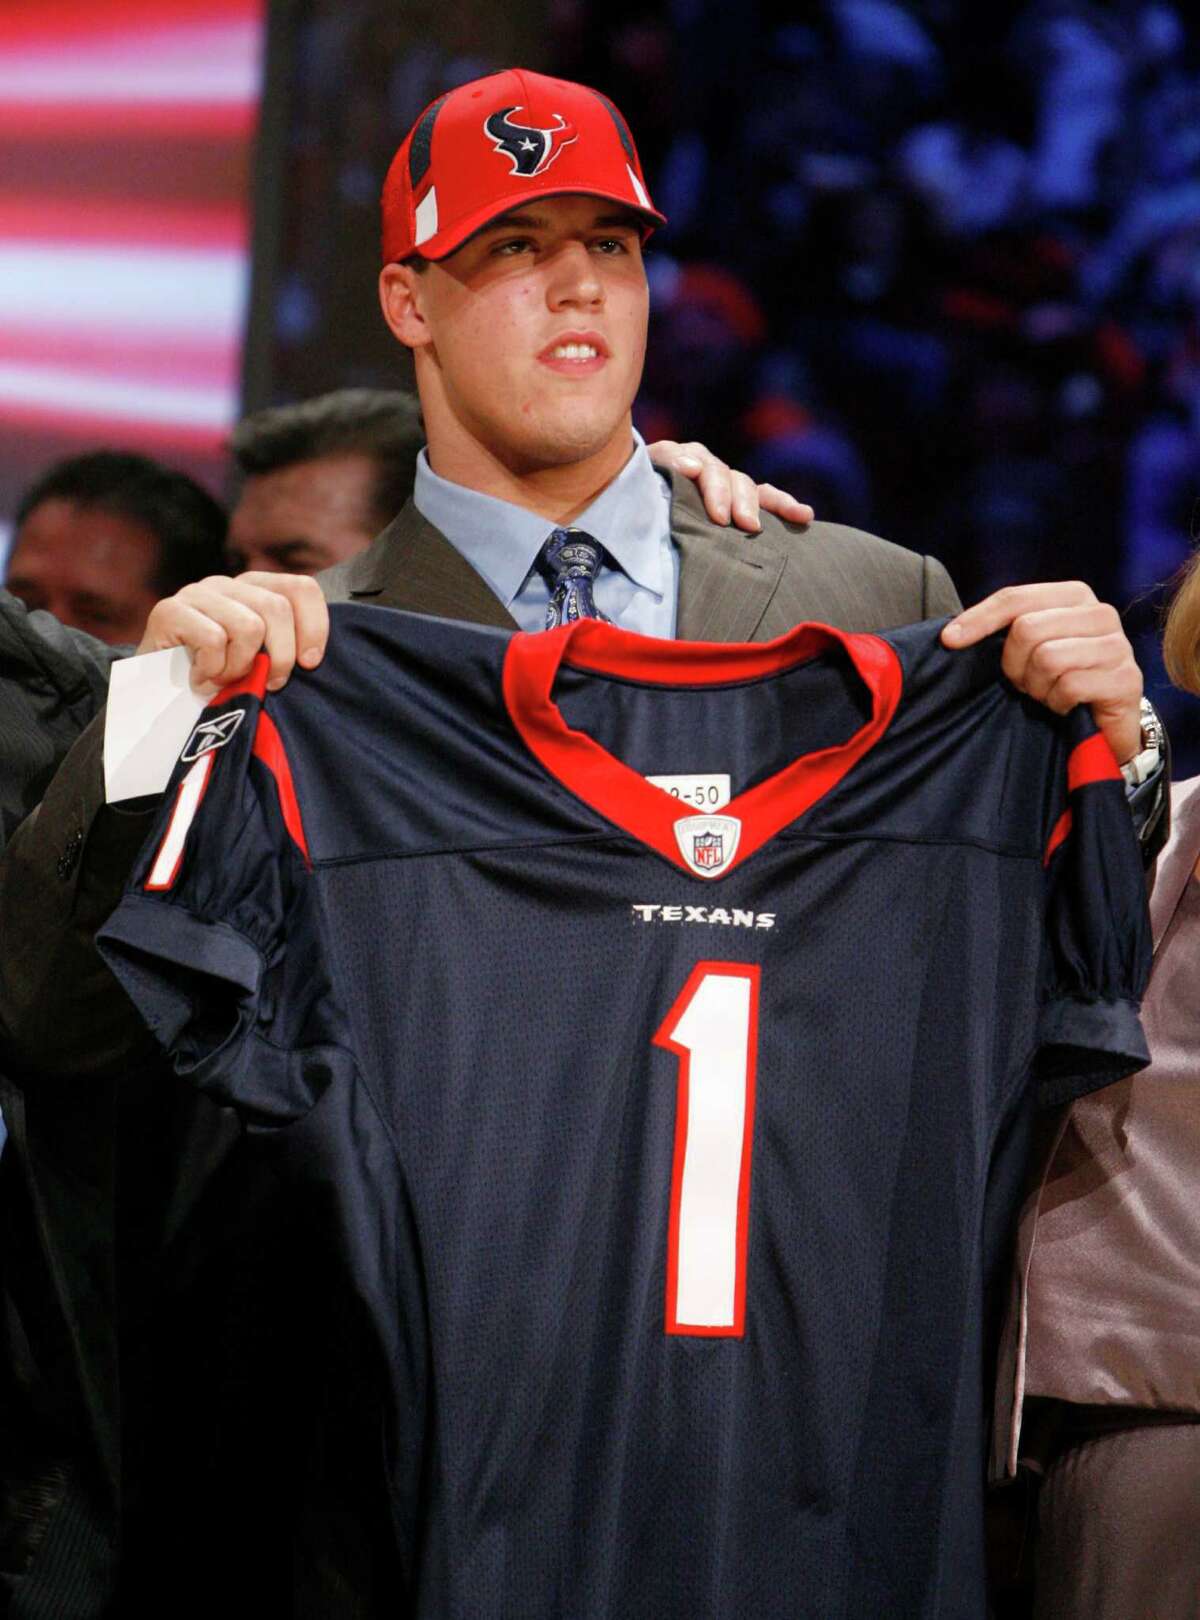 Selected in the first round of the NFL draft by the Texans. Was the 15th player taken overall and the second linebacker.